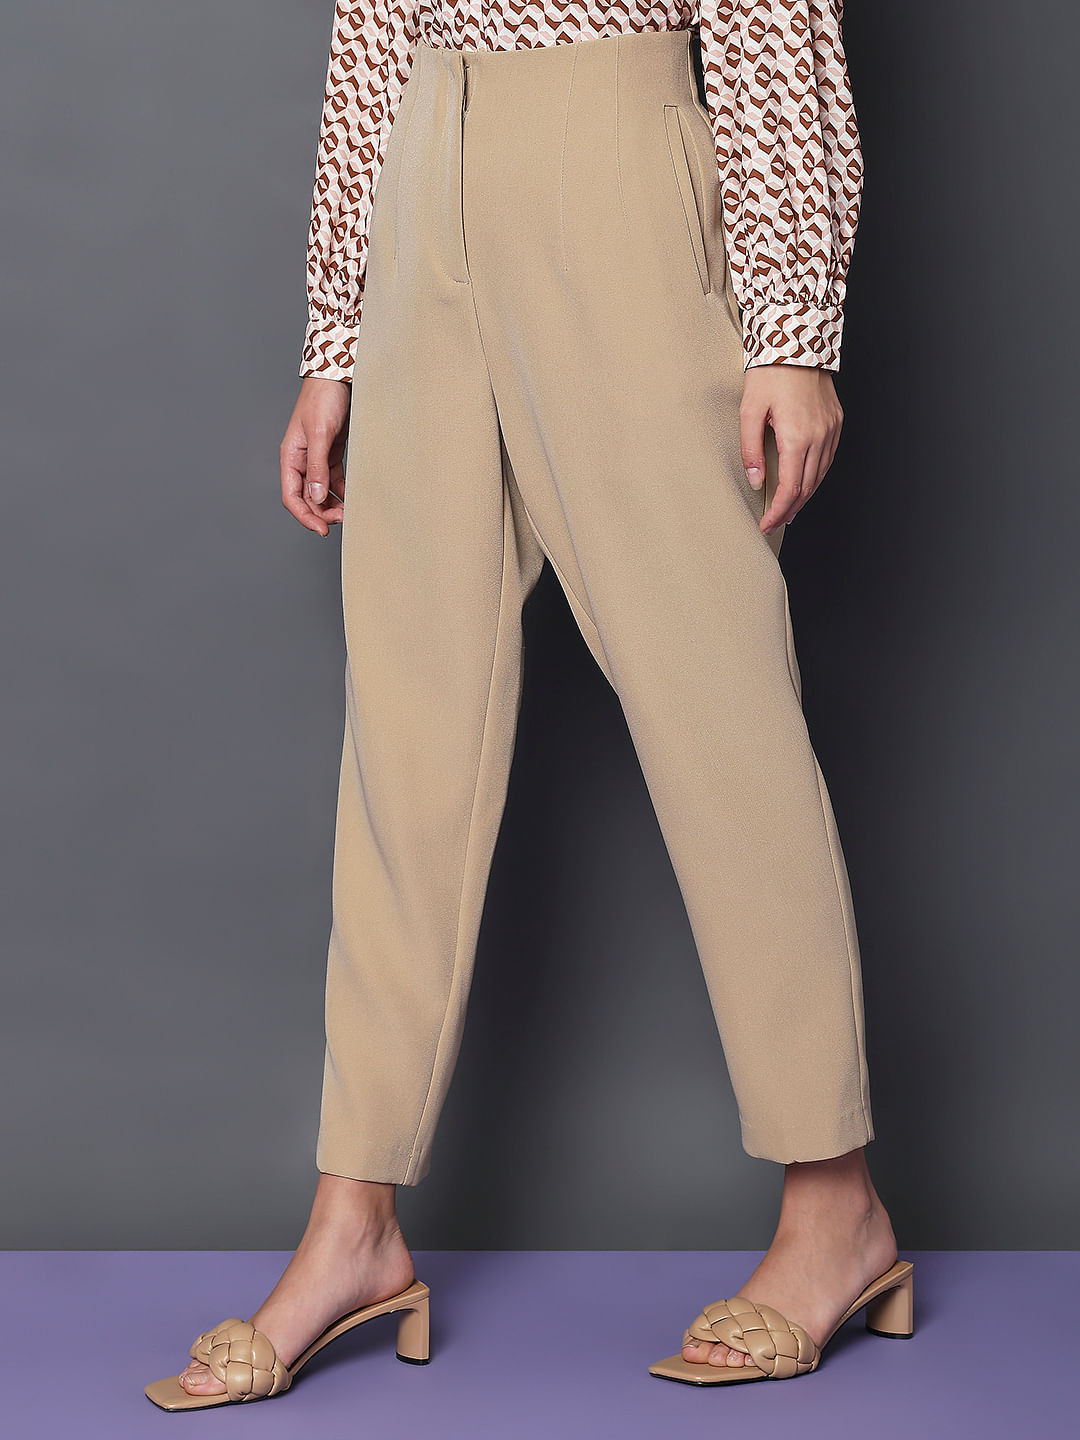 Chic Camel Pants  Tapered Pants  Belted Pants  Trouser Pants  Lulus